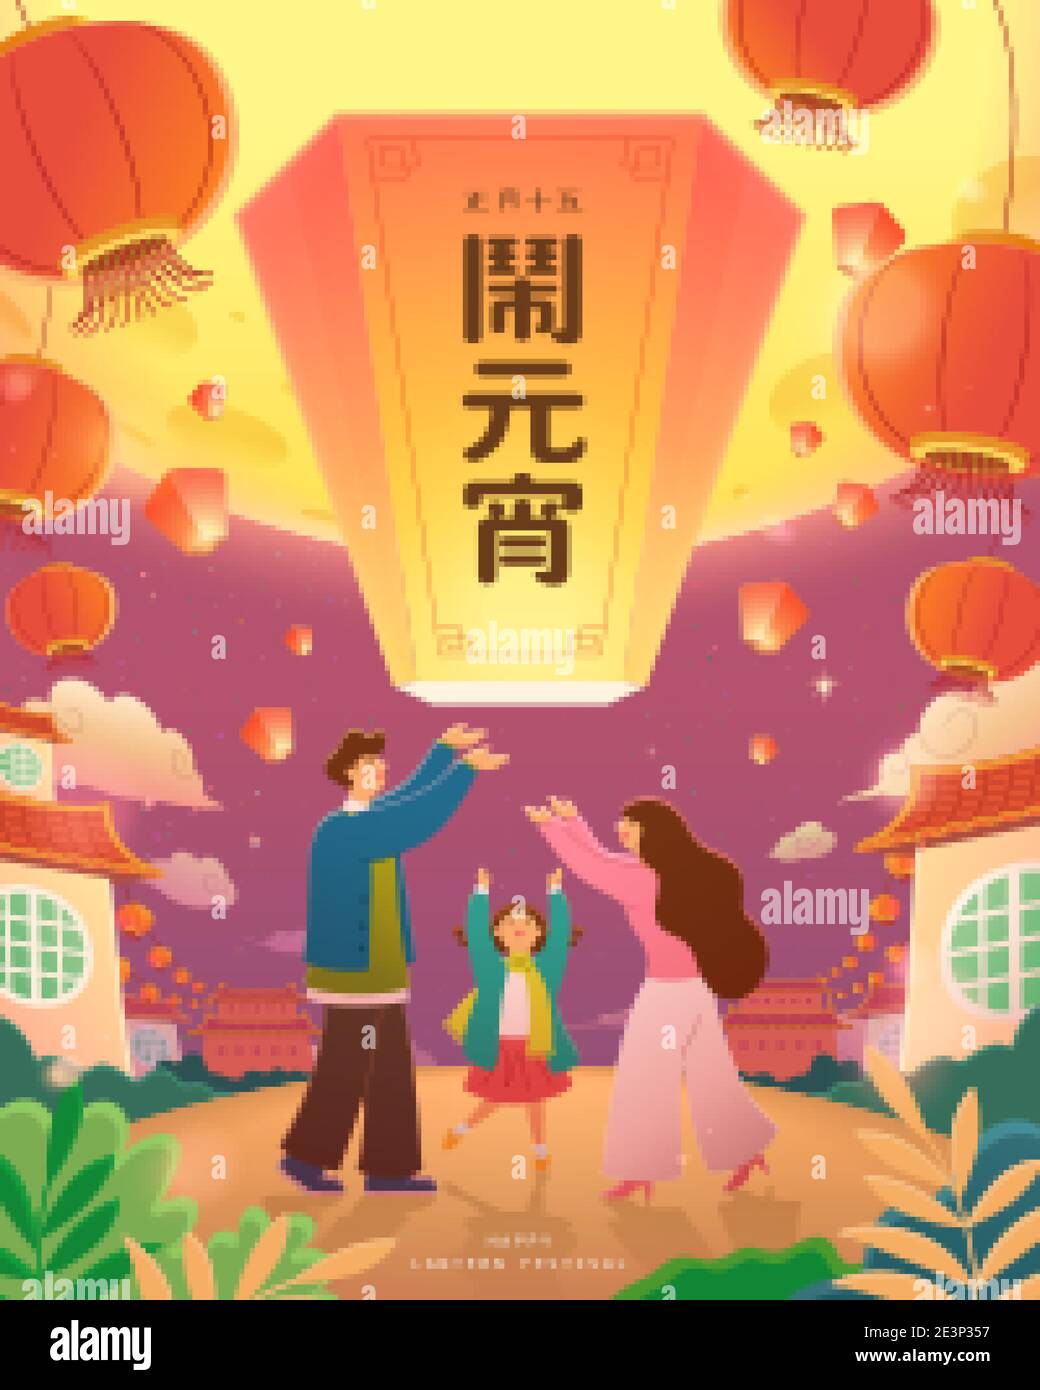 Cute Asian family releasing sky lanterns and enjoying the full moon scenery. Translation: Happy Chinese lantern festival Stock Vector